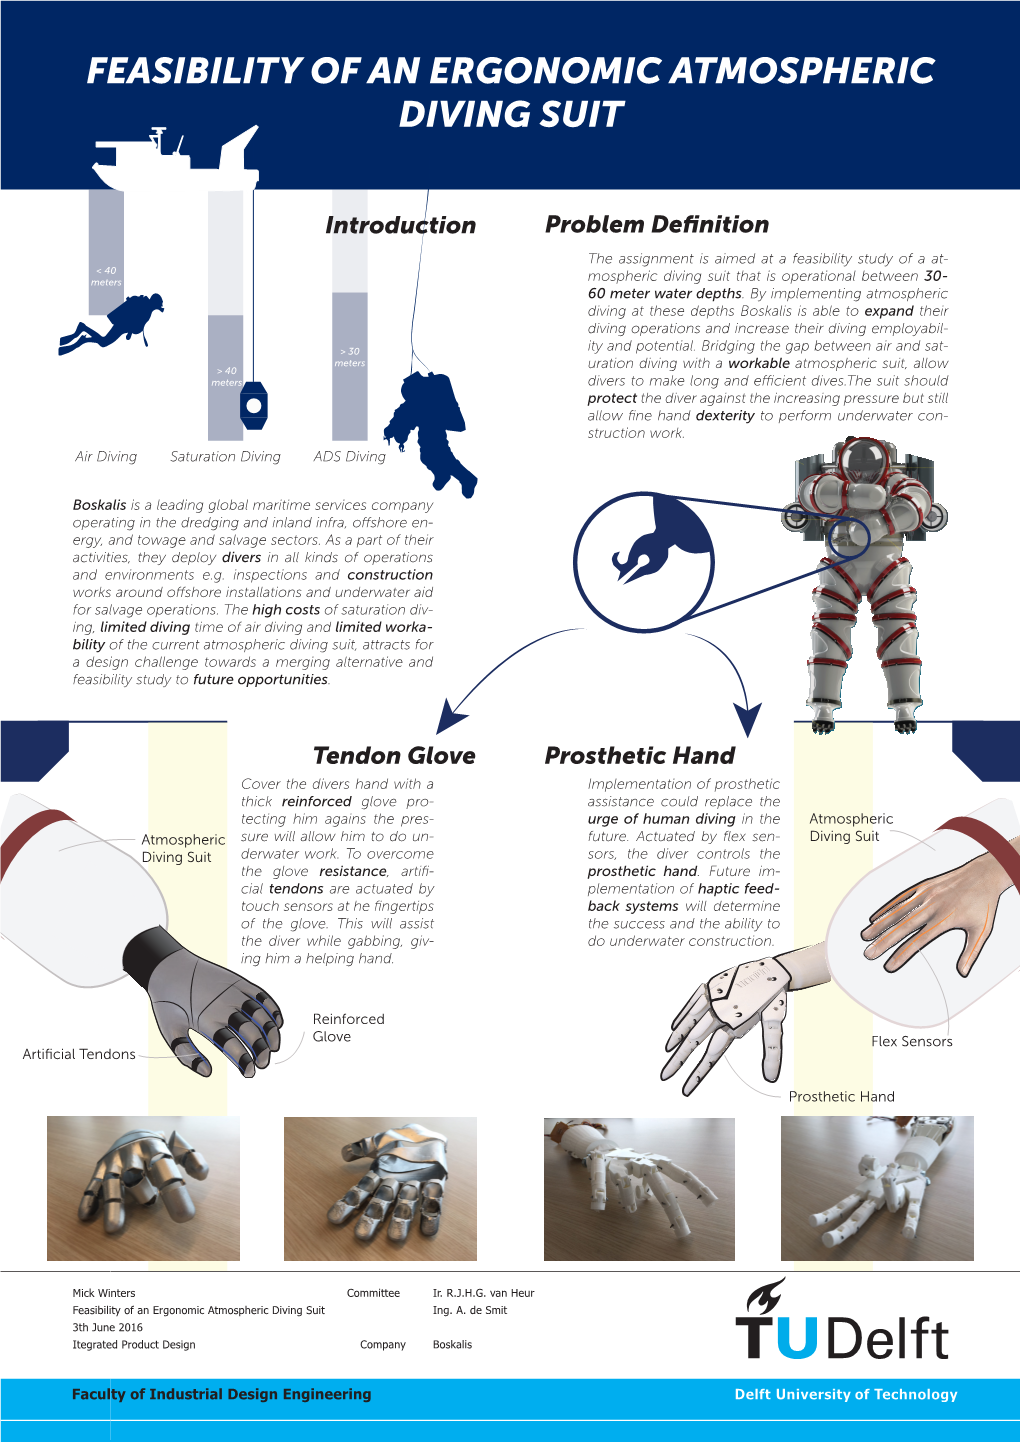 Feasibility of an Ergonomic Atmospheric Diving Suit